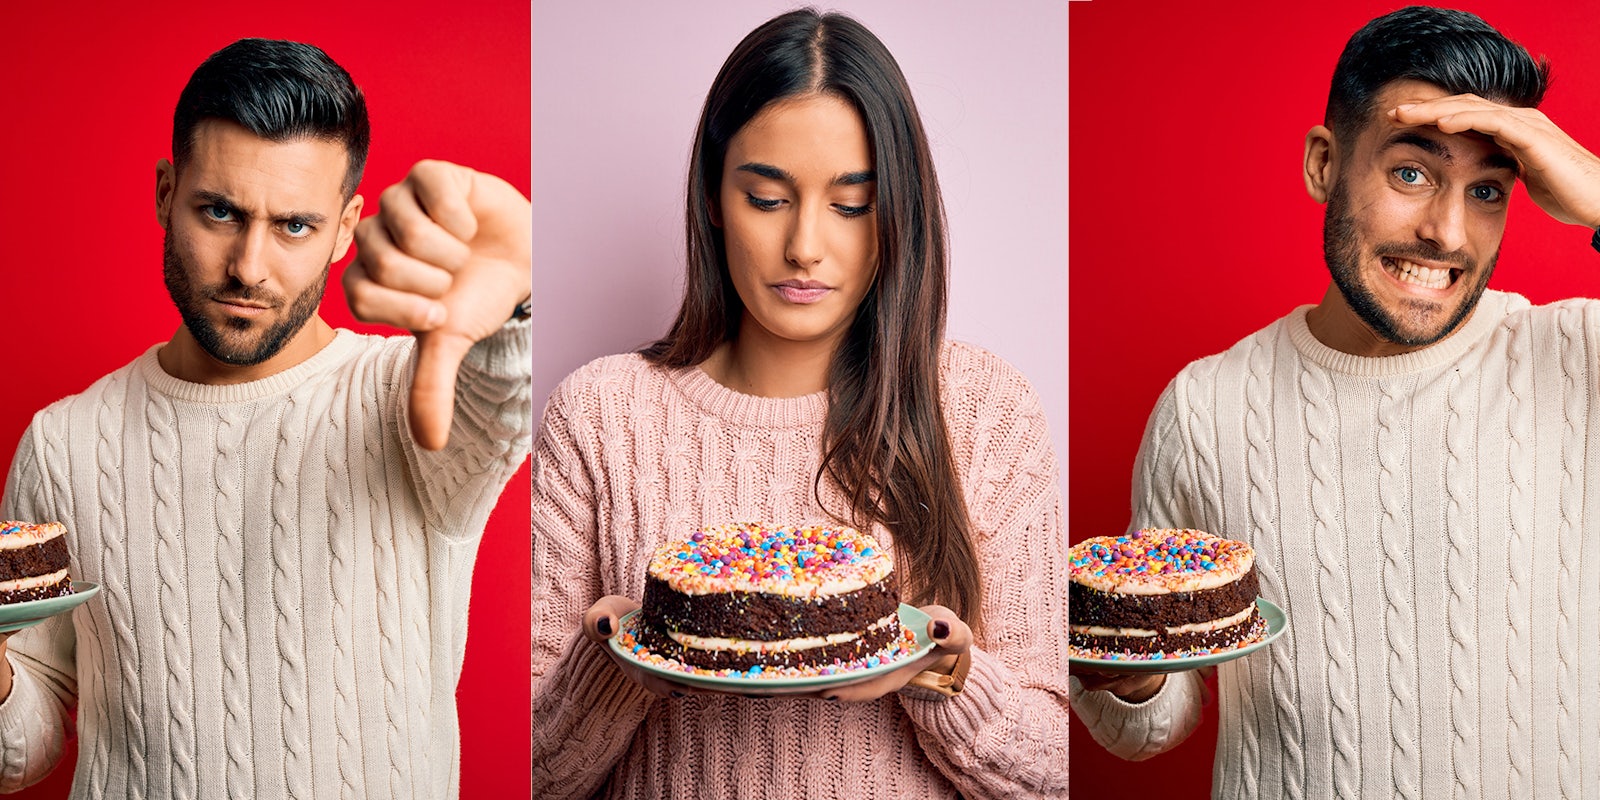 People are divided over a guy mad at his gf for not making cake he requested